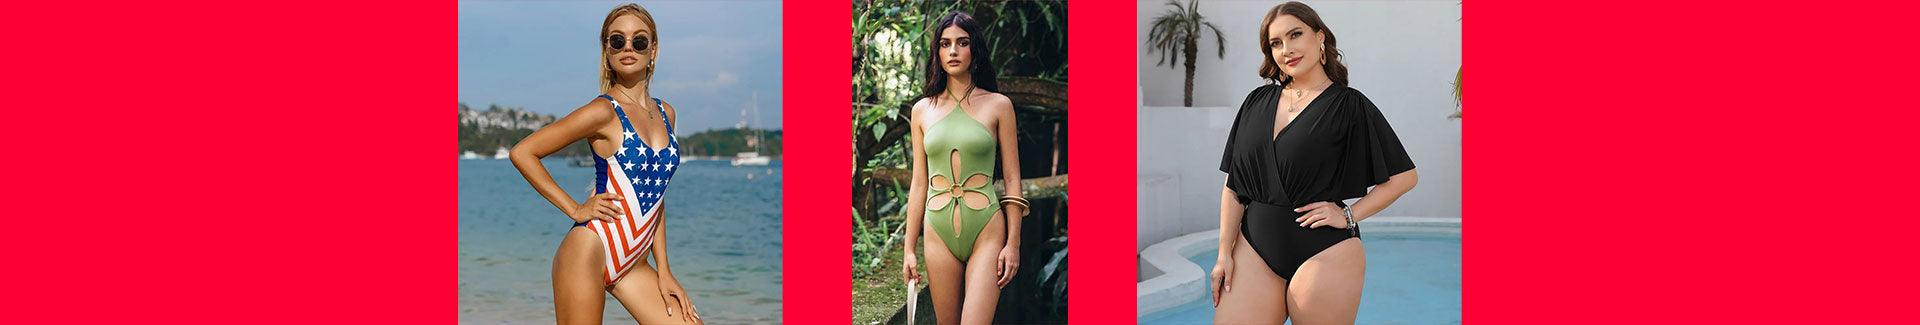 Get Ready for Summer with Women's One-Piece Swimsuits - Daily Fashion